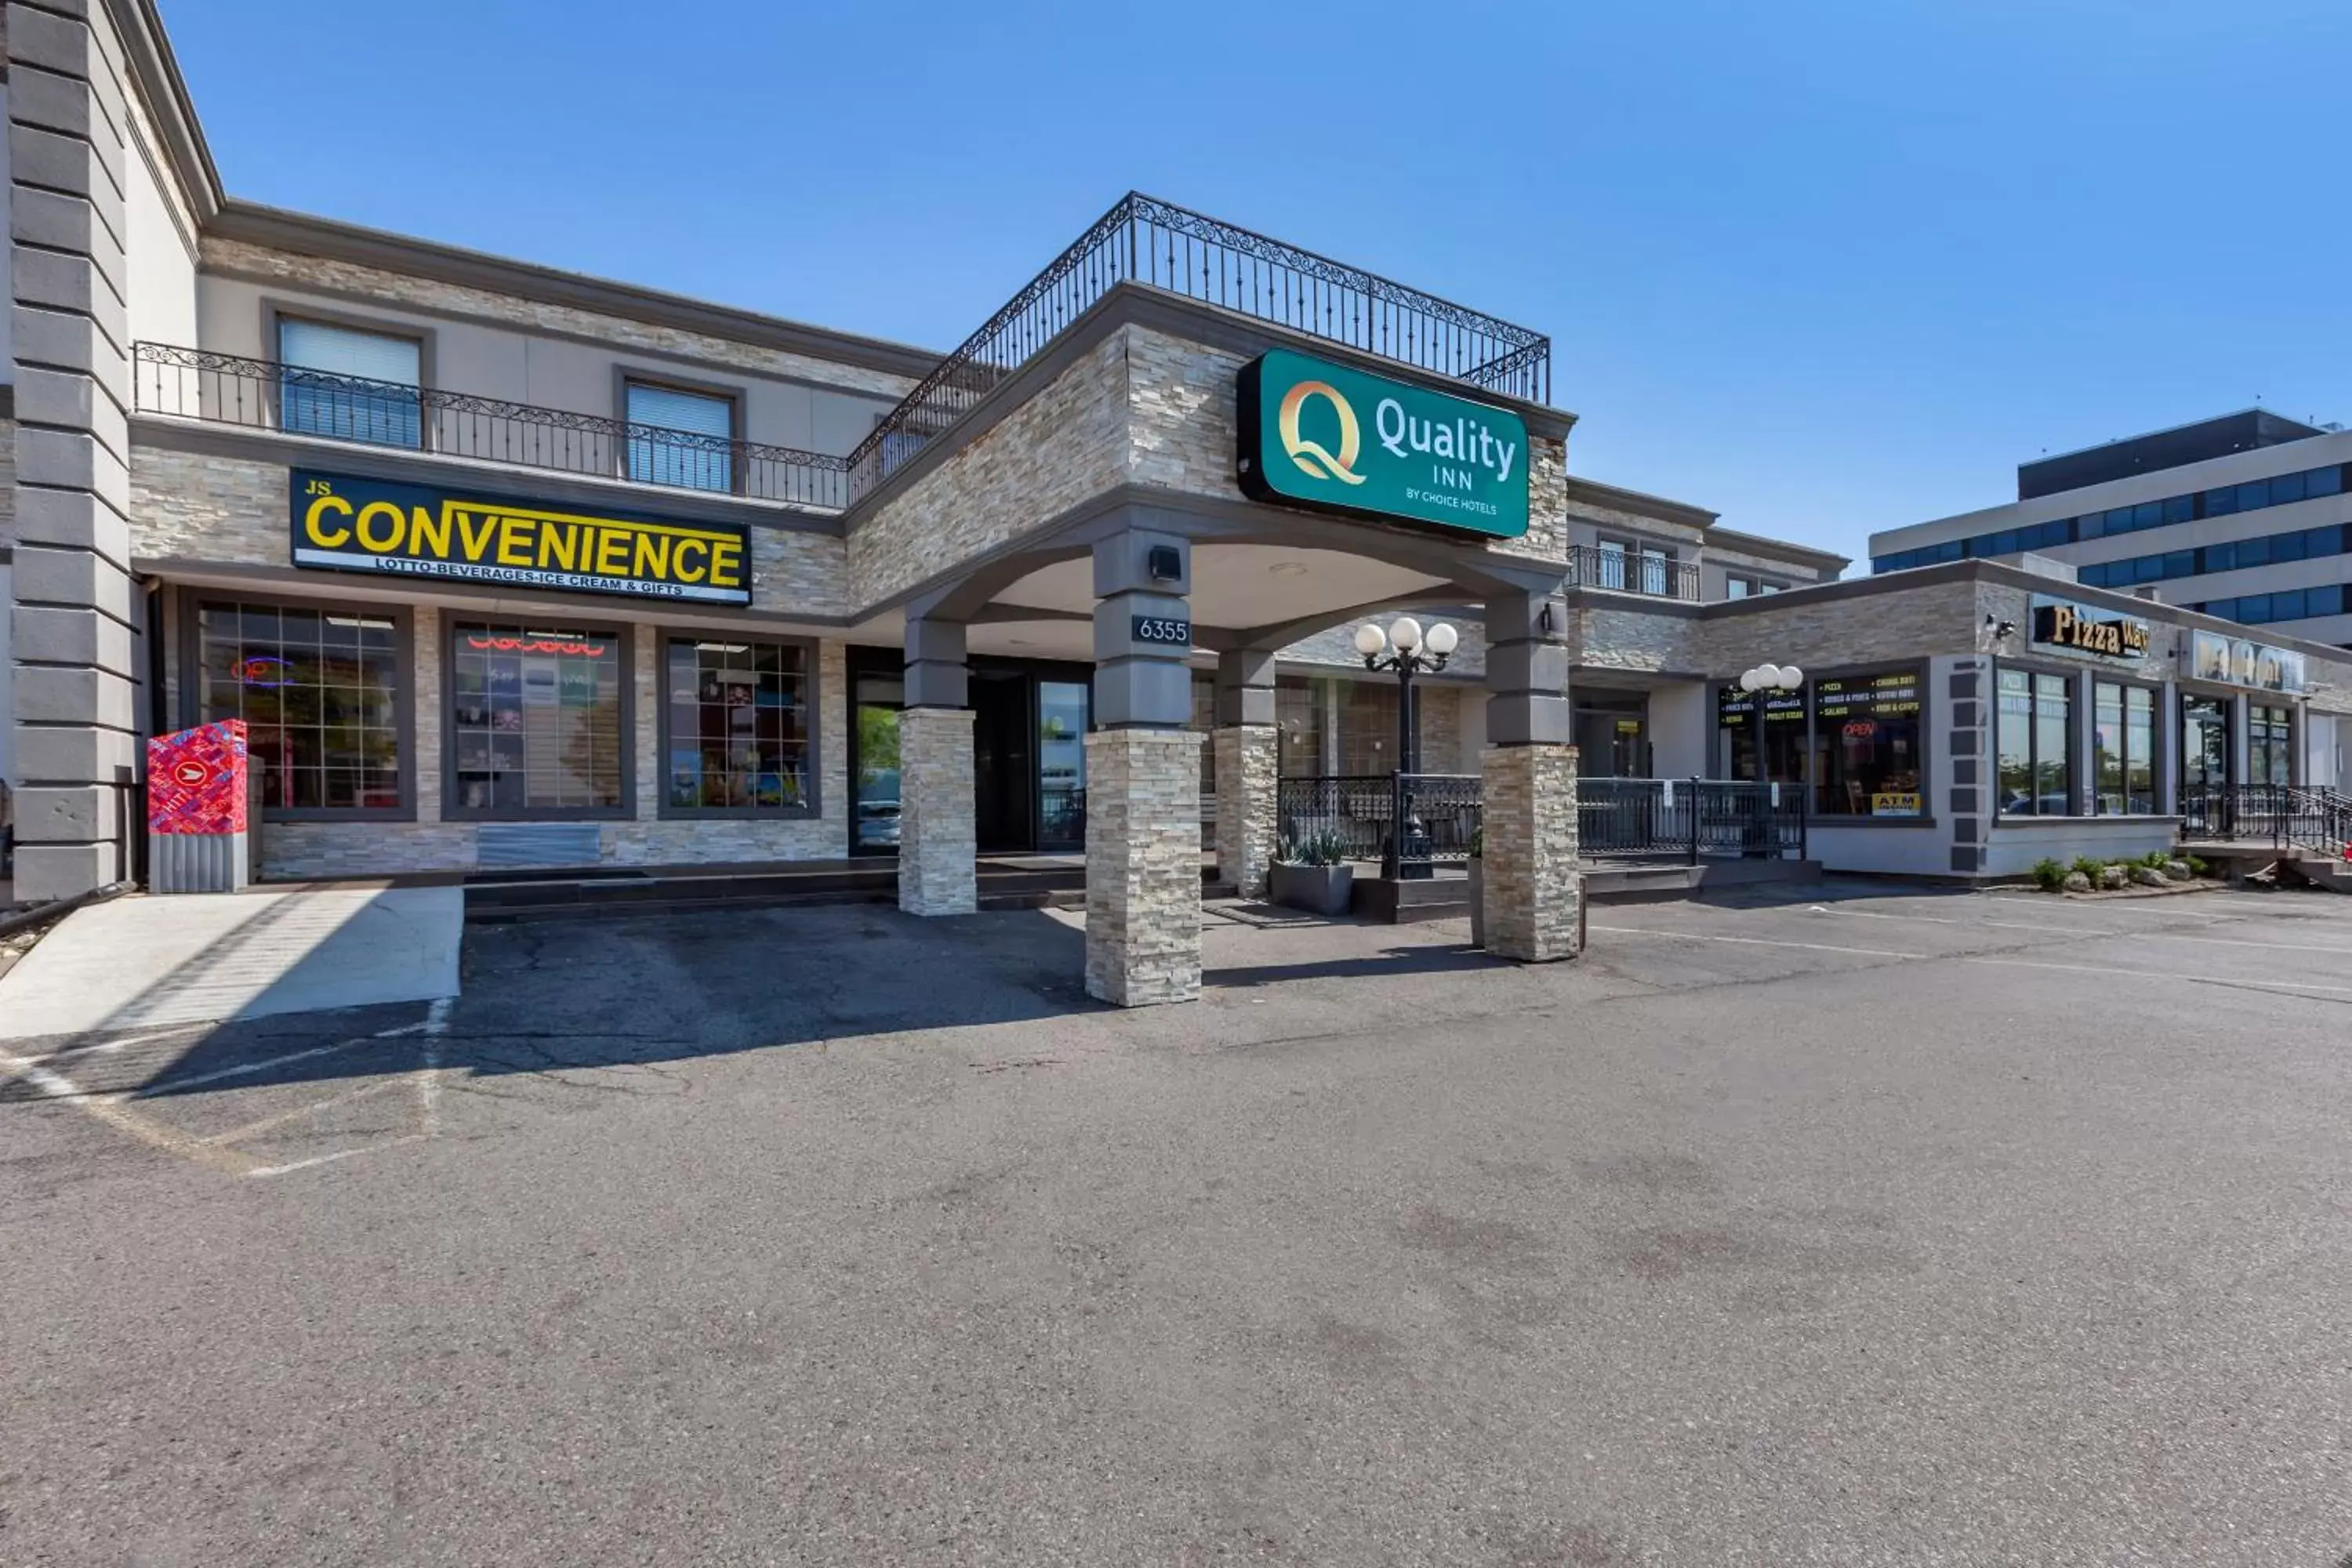 Property Building in Quality Inn Toronto Airport